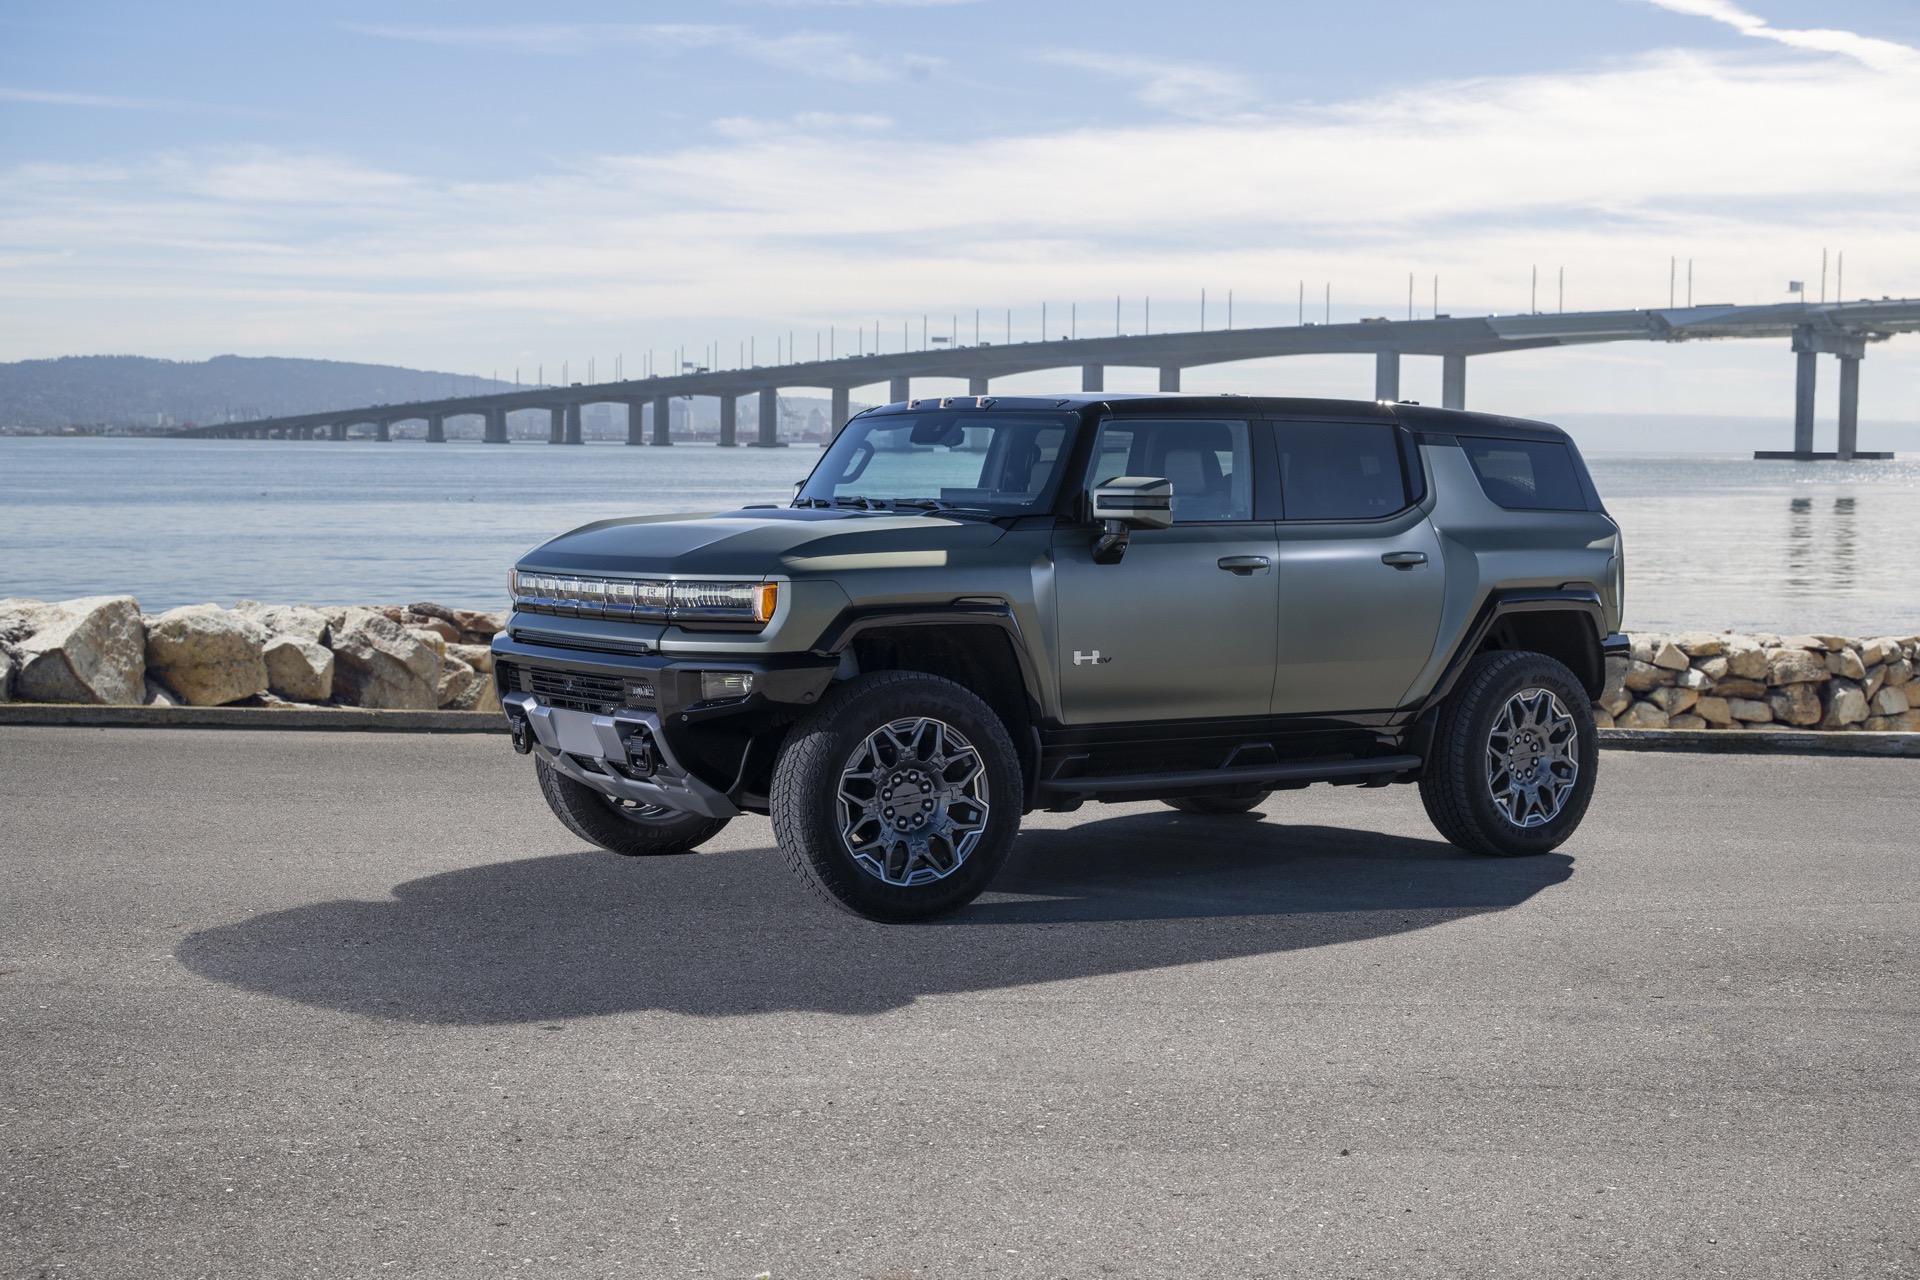 GMC Hummer EV joins gas-guzzlers in list of meanest for the environment